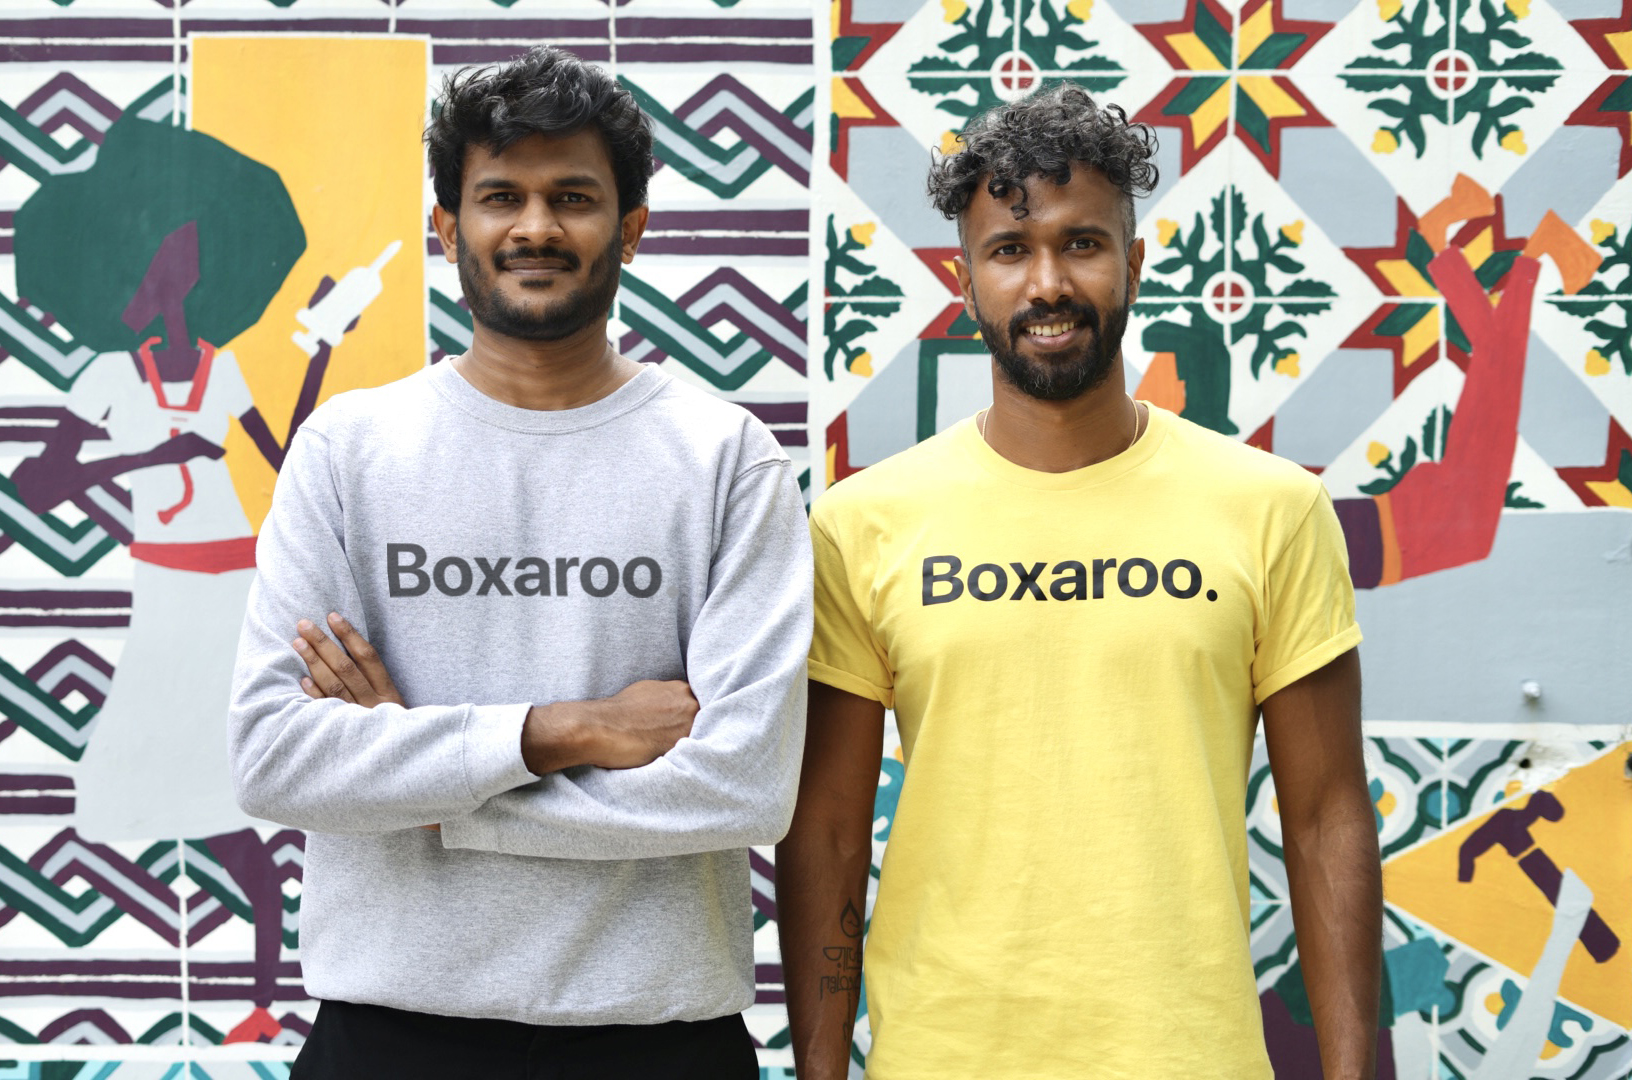 Solving problems and embracing change: Q&A with Boxaroo